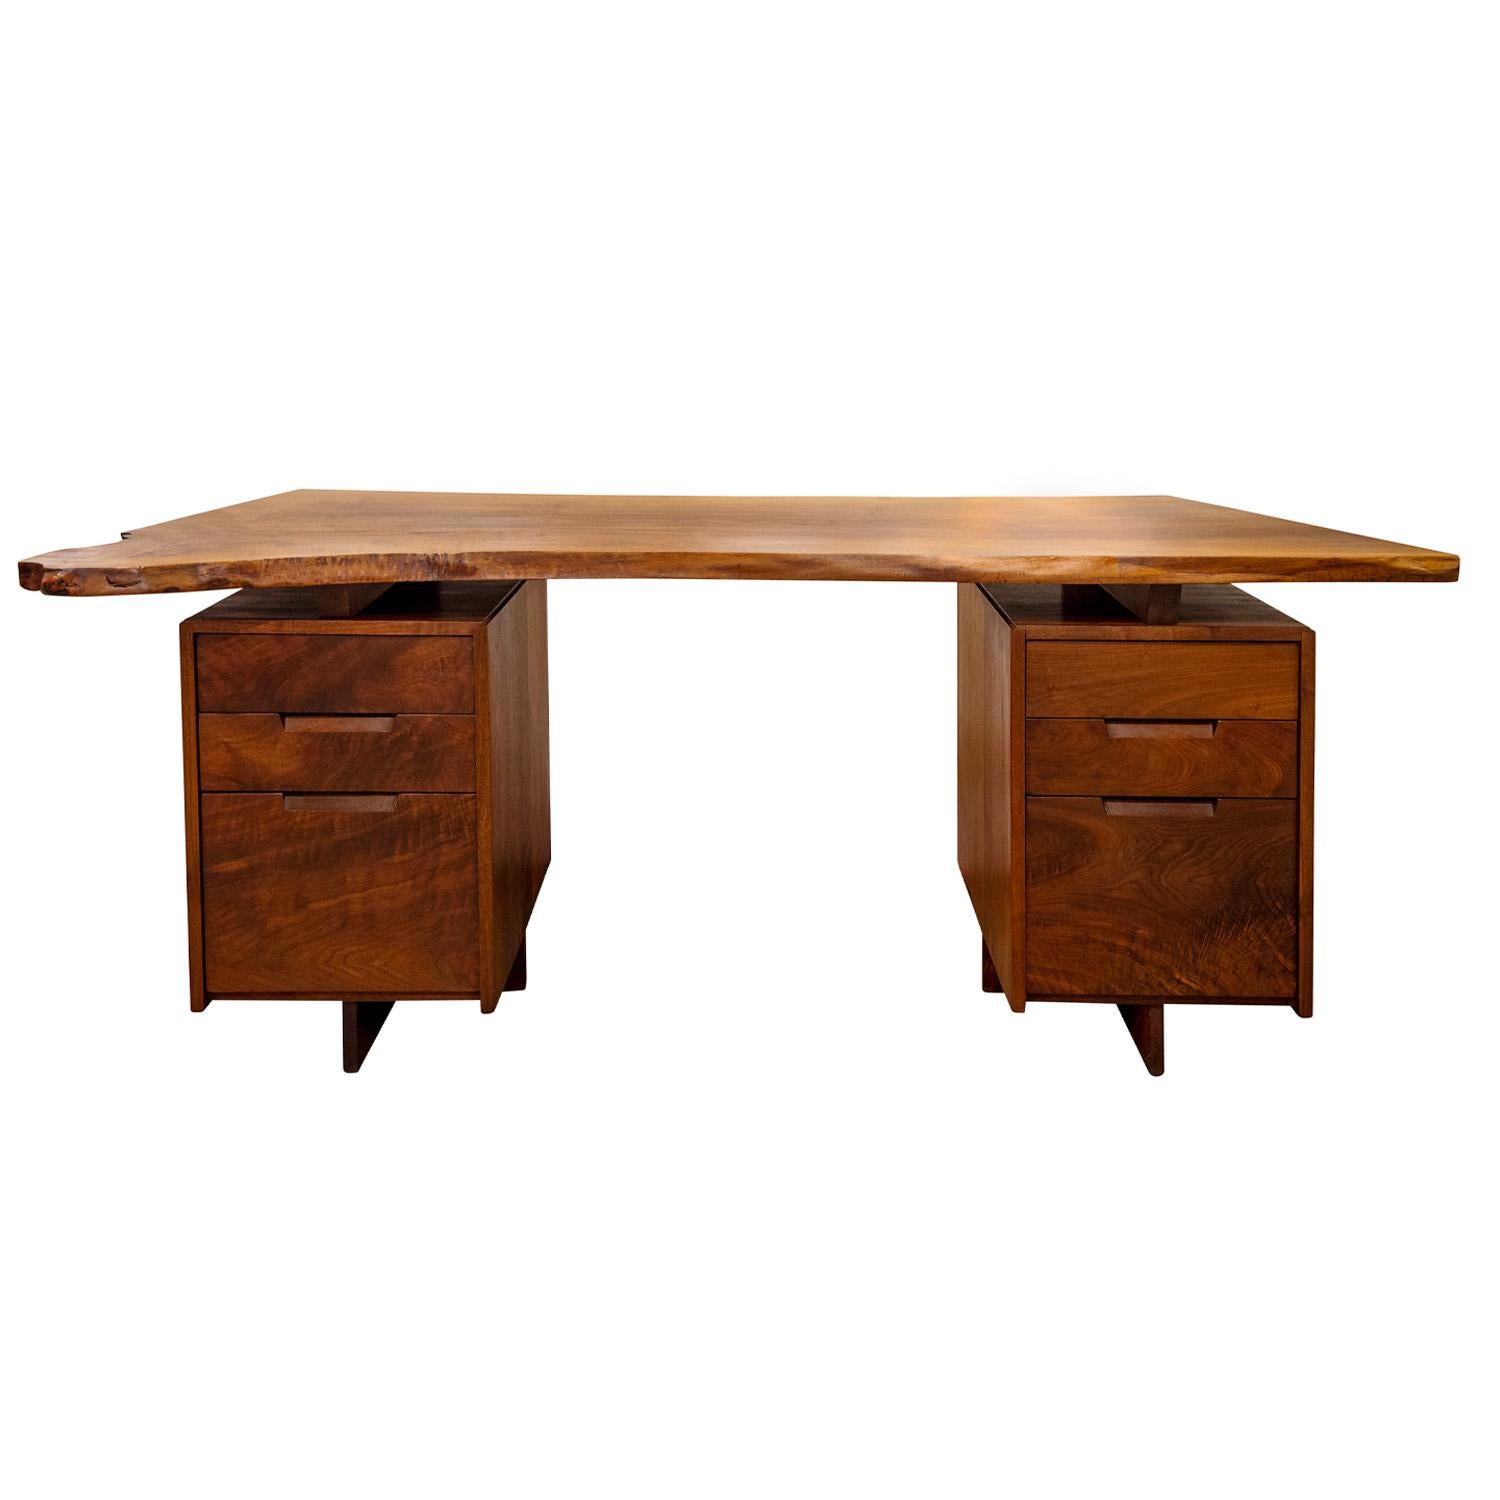 Rare double pedestal desk with free edge top in walnut with rosewood butterfly on top by George Nakashima, American 1950's (name of client “COX” written in marker on bottom of top). Each one of these pieces was custom made for it’s owner, and as